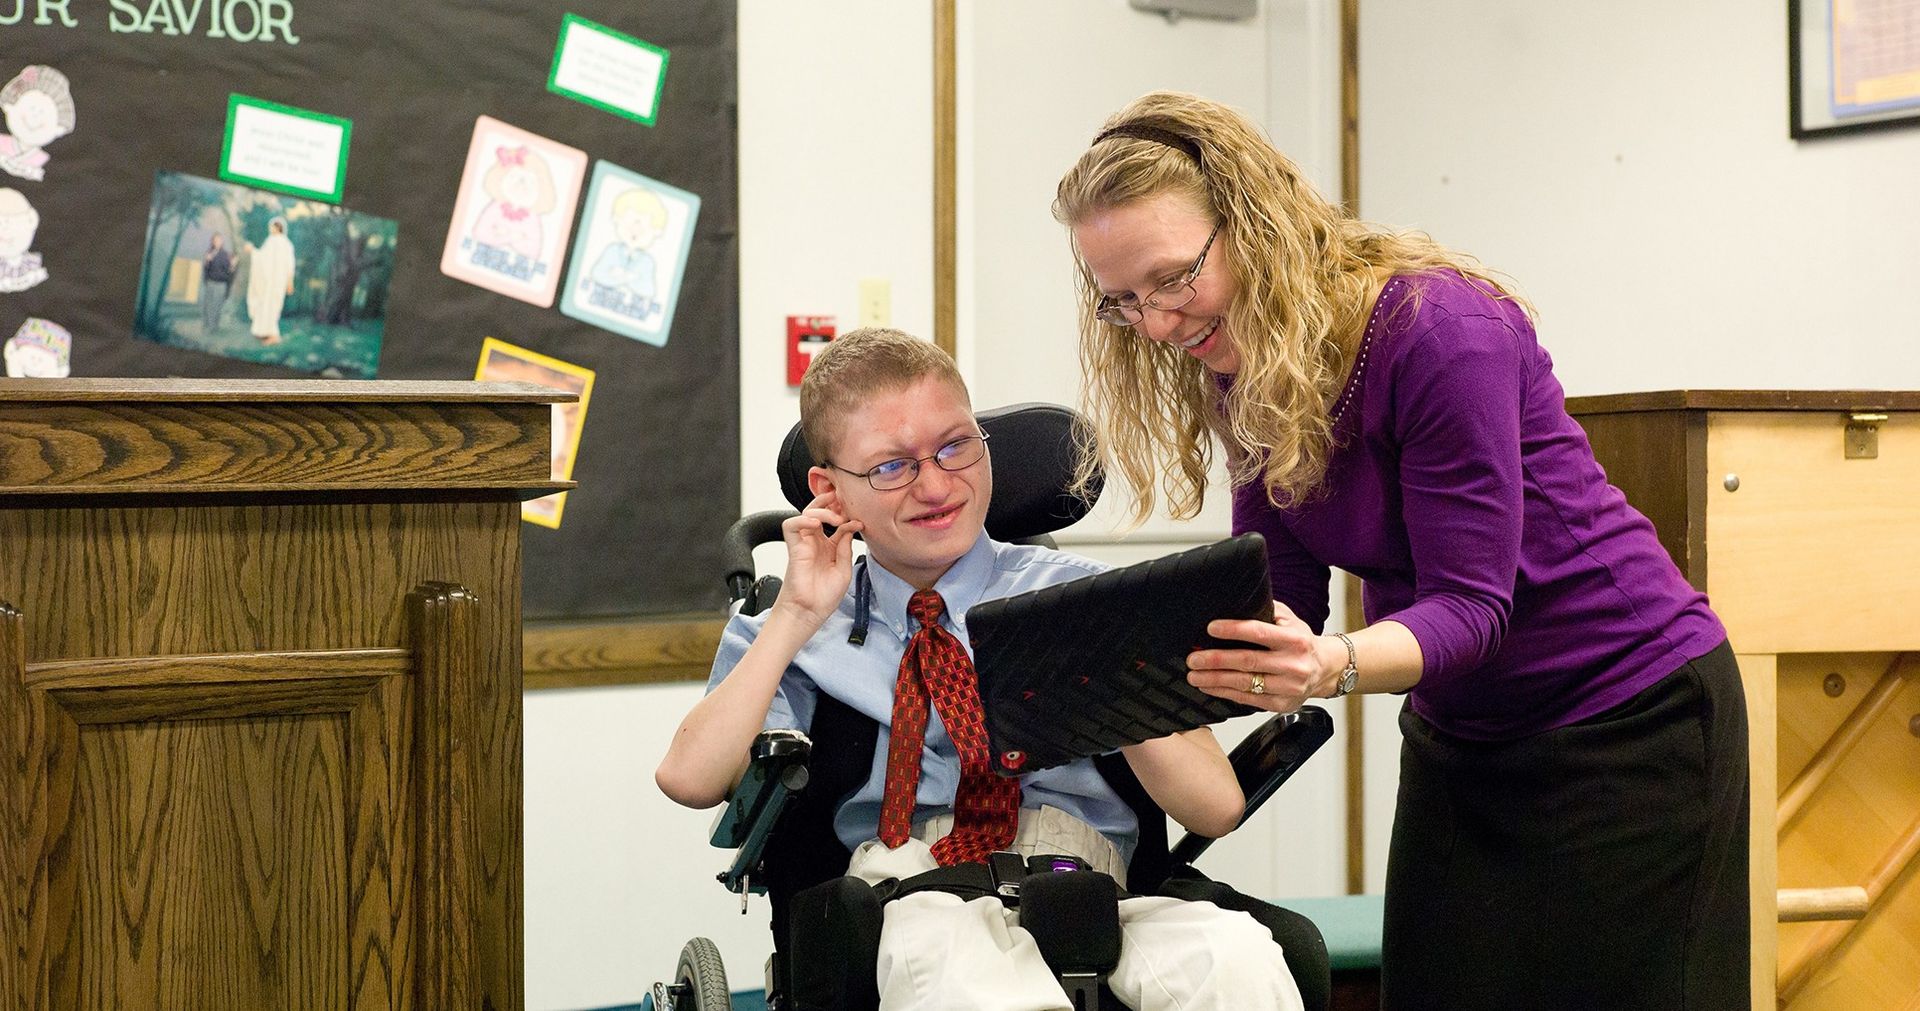 Teacher helping a young man in a wheelchair present at the front of a class.